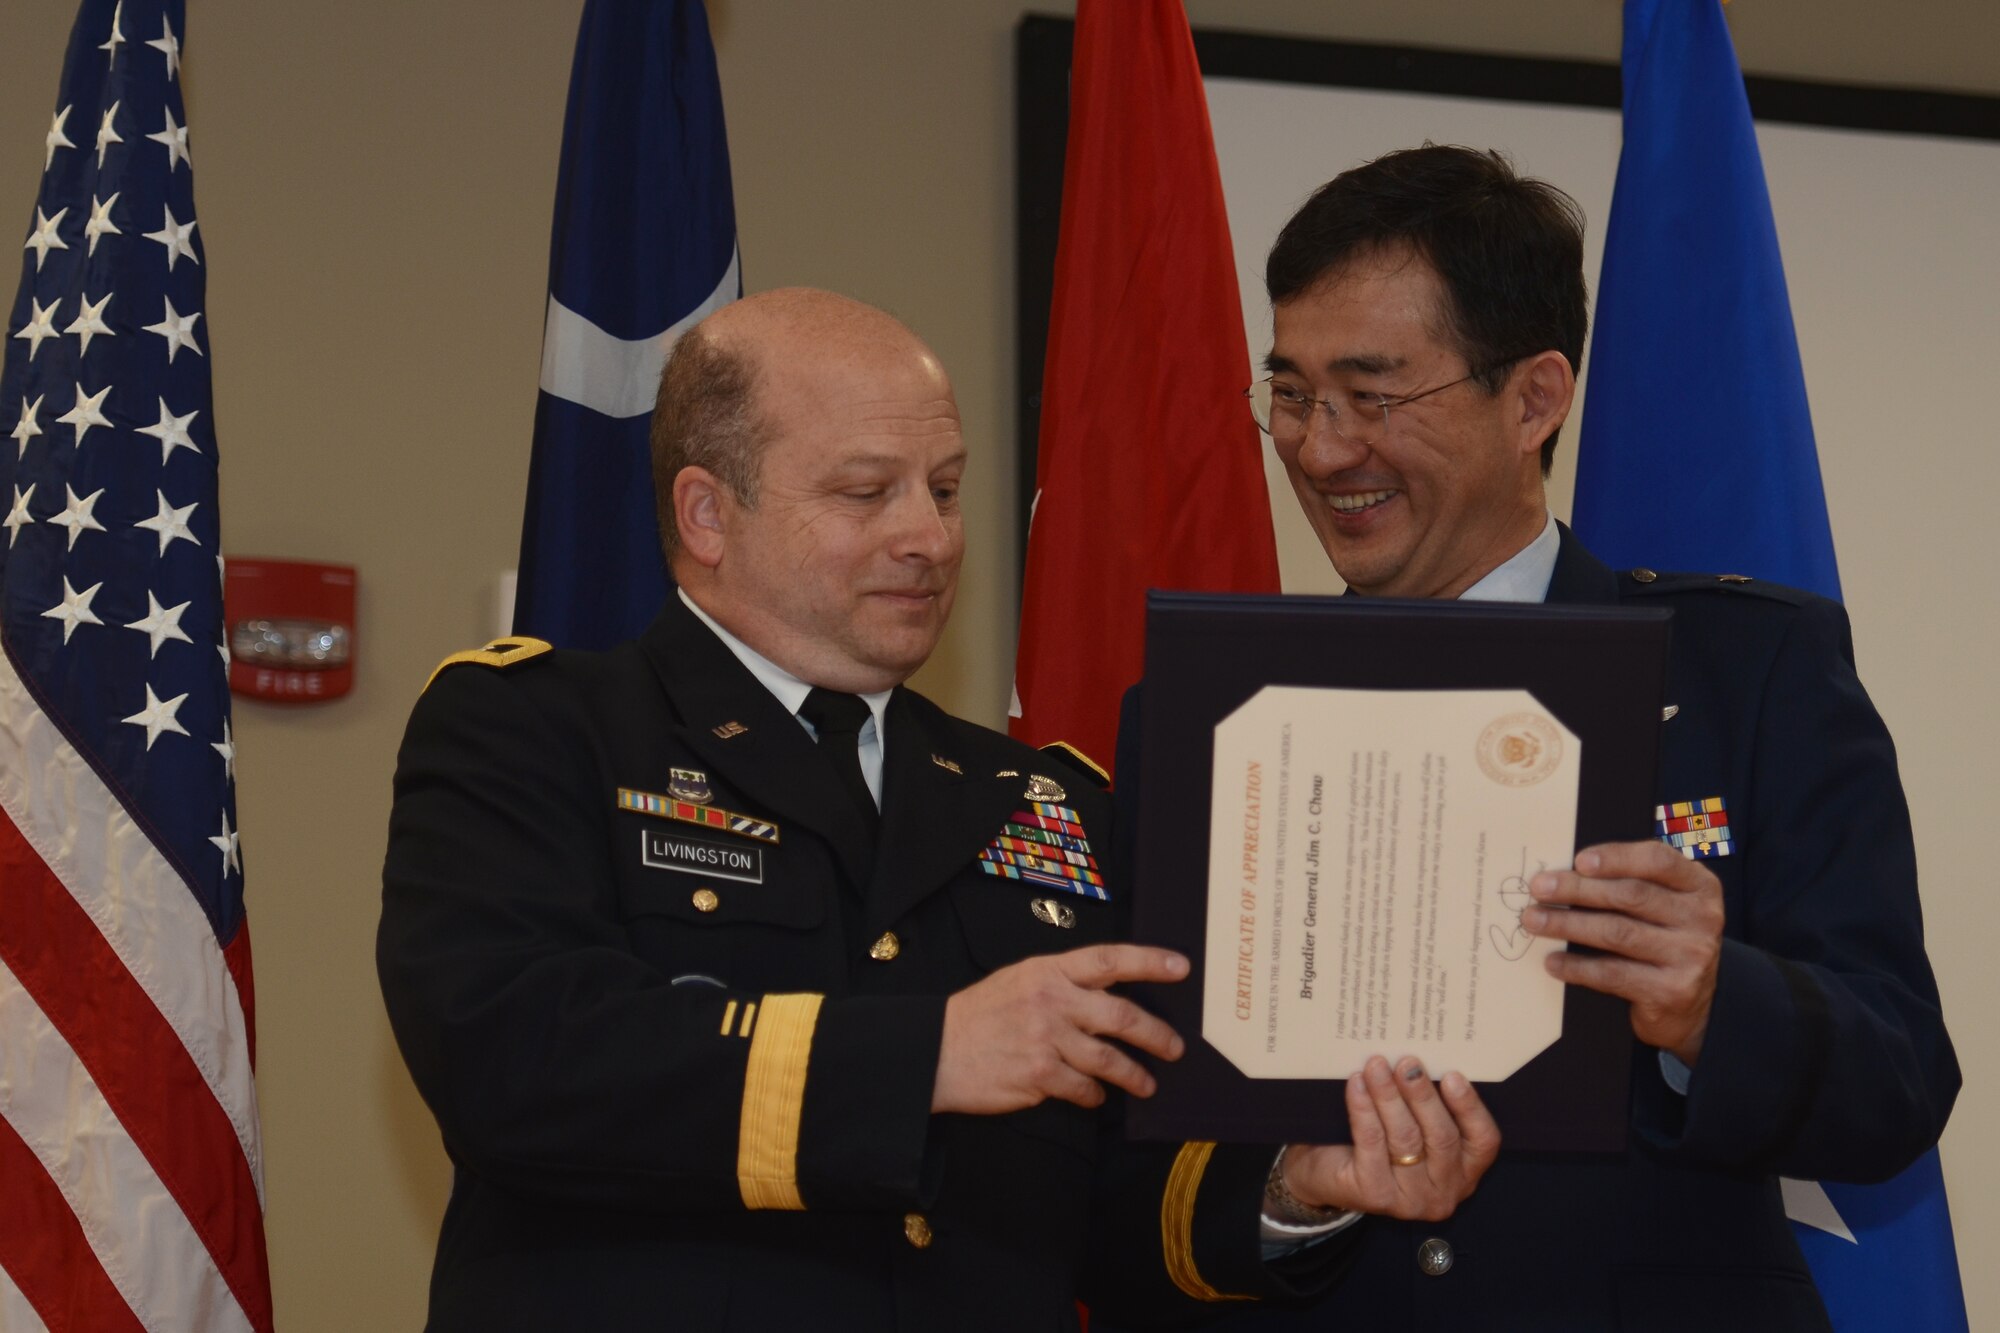 U.S. Army Maj. Gen. Robert E. Livingston Jr (left), the Adjutant General for South Carolina, presents a retirement certificate to U.S. Air Force Brig. Gen. (Dr.) Jim Chow, the State Air Surgeon and Assistant to the Director of the Air National Guard, at McEntire Joint National Guard Base, Feb. 8, 2015. Brig. Gen. Chow retired with thirty years of service to the South Carolina Air National Guard and the 169th Fighter Wing. (U.S. Air National Guard photo by Senior Master Sgt. Edward Snyder/Released)